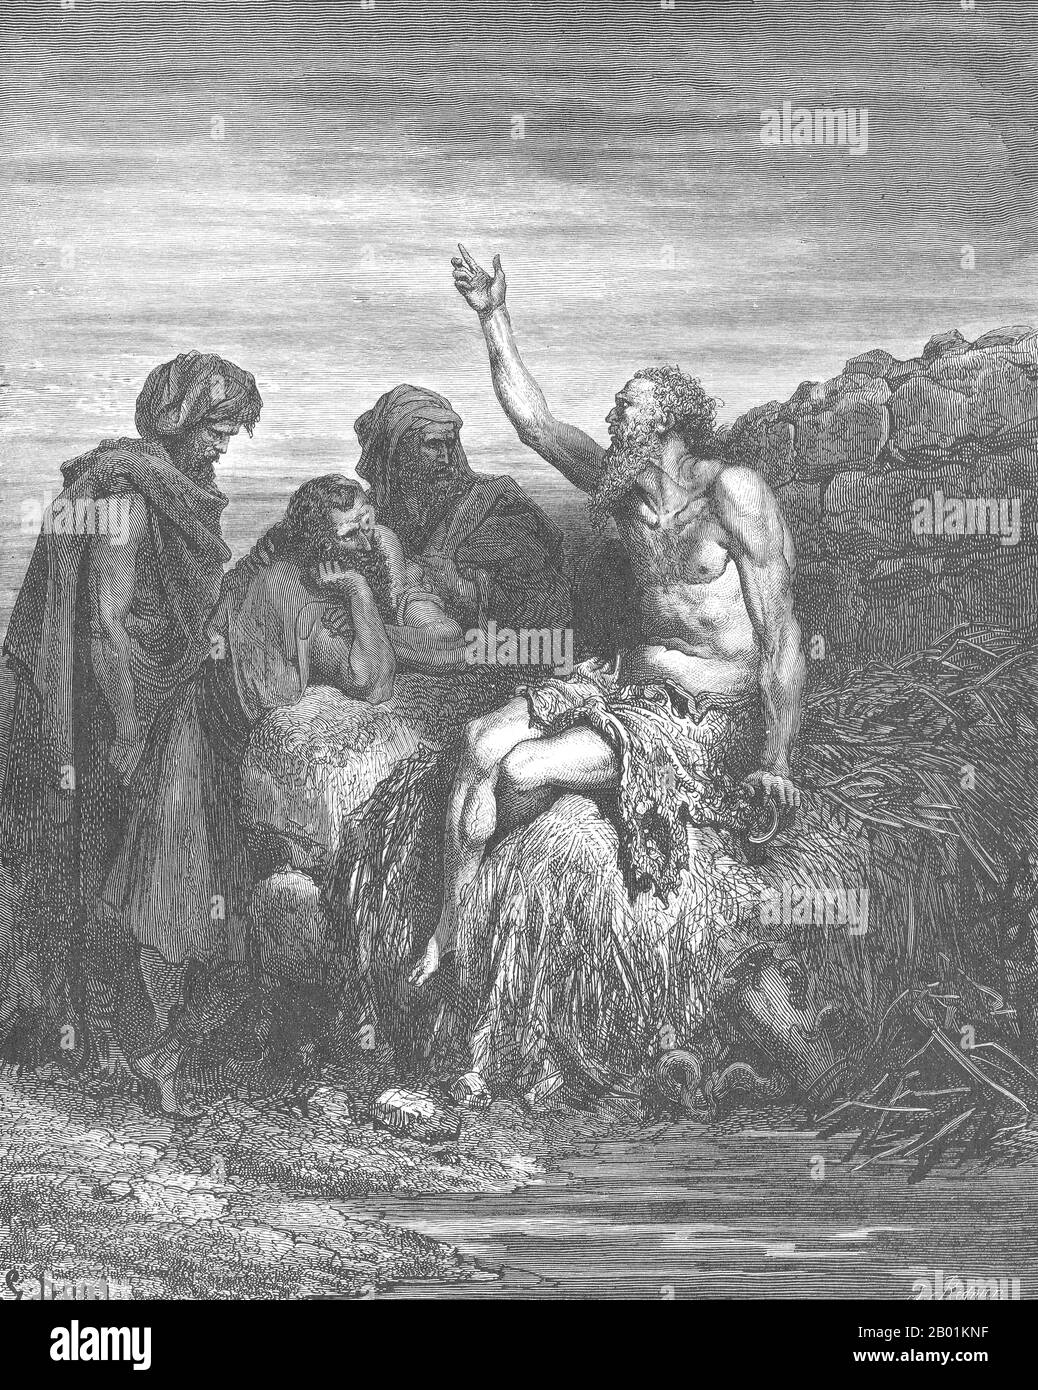 France: 'Job Speaks with His Friends (Book of Job 2:1-13)'. Lithograph by Gustave Doré (6 January 1832 - 23 January 1883), 1866.  Job is the central character of the Book of Job in the Hebrew Bible. Job is also recognised as a prophet of God in the Qur'an.  The Book of Job begins with an introduction to Job's character. He is described as a blessed man who lives righteously. God's praise of Job prompts Satan to challenge Job's integrity and suggesting that Job serves God simply because he protects him. God removes Job's protection, allowing Satan to take his wealth, his children and his health Stock Photo